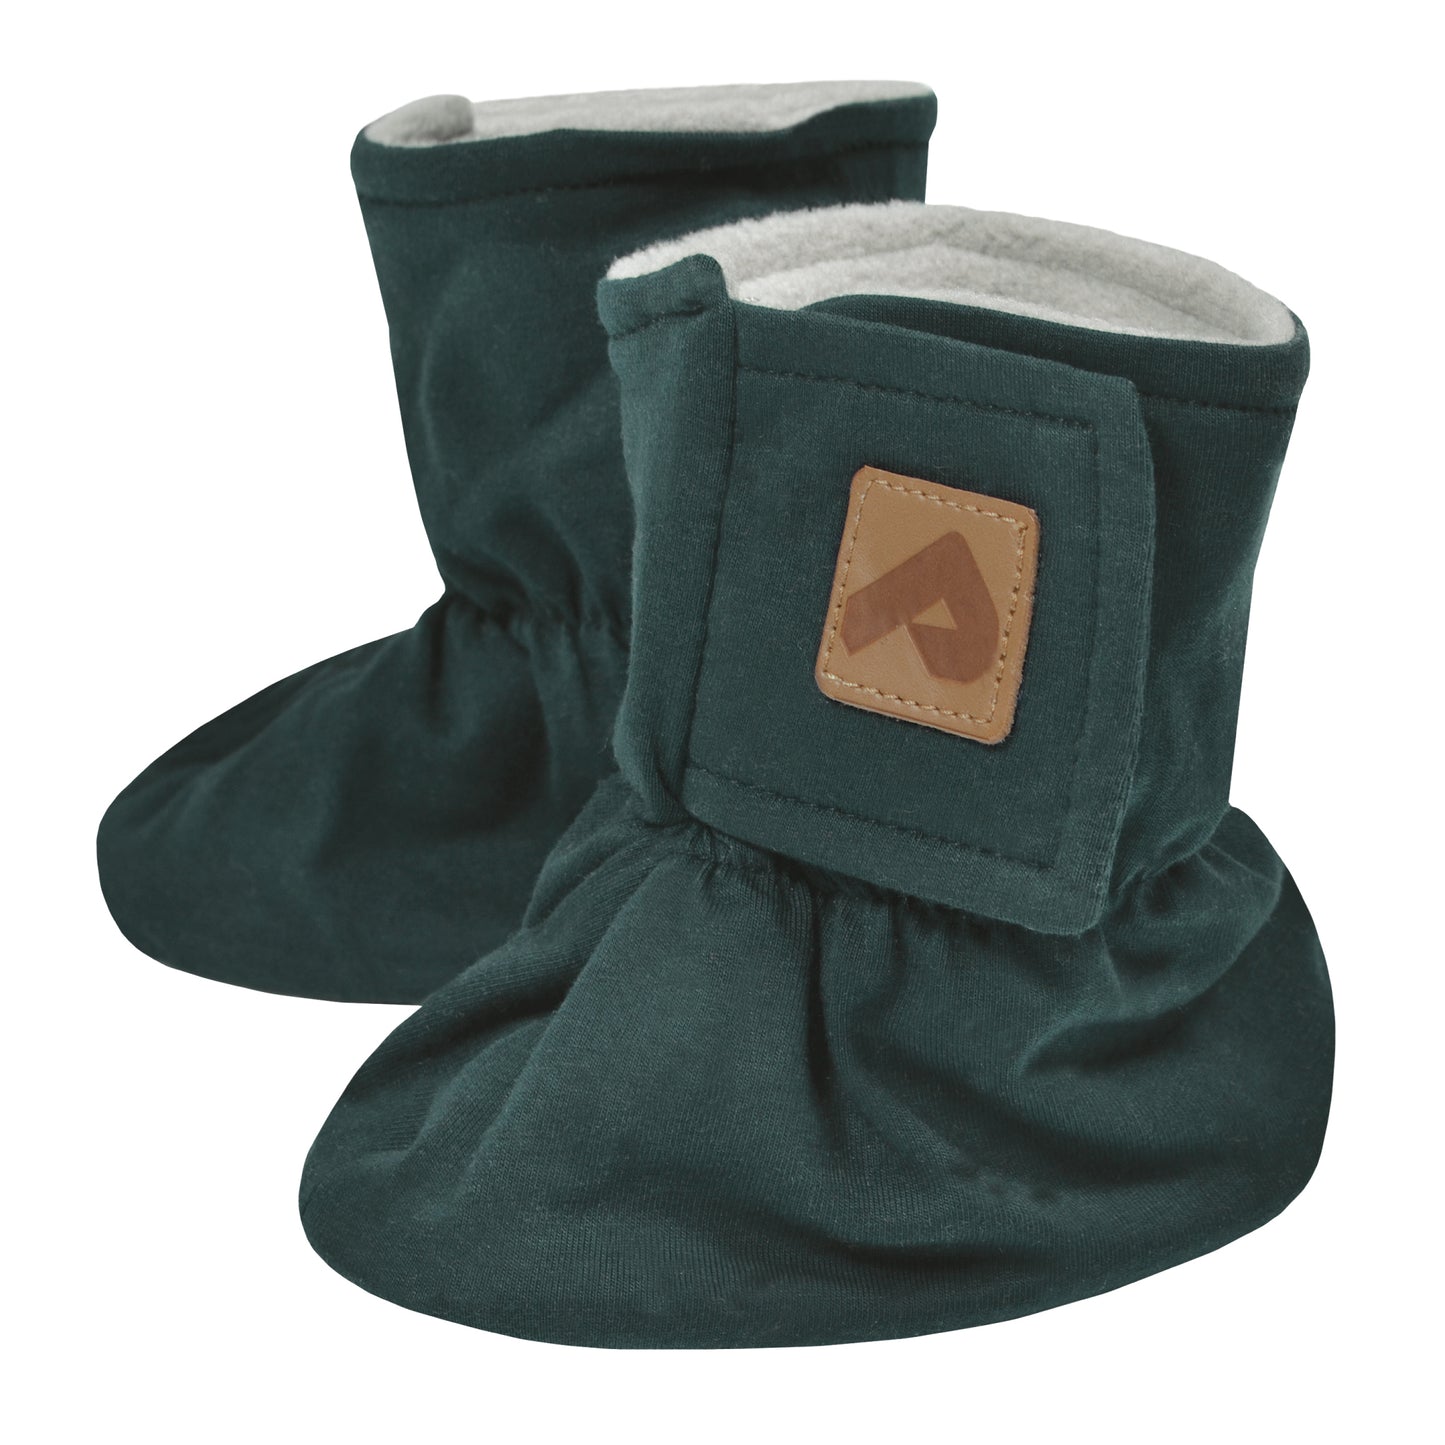 Cotton booties with fleece lining - Epinette